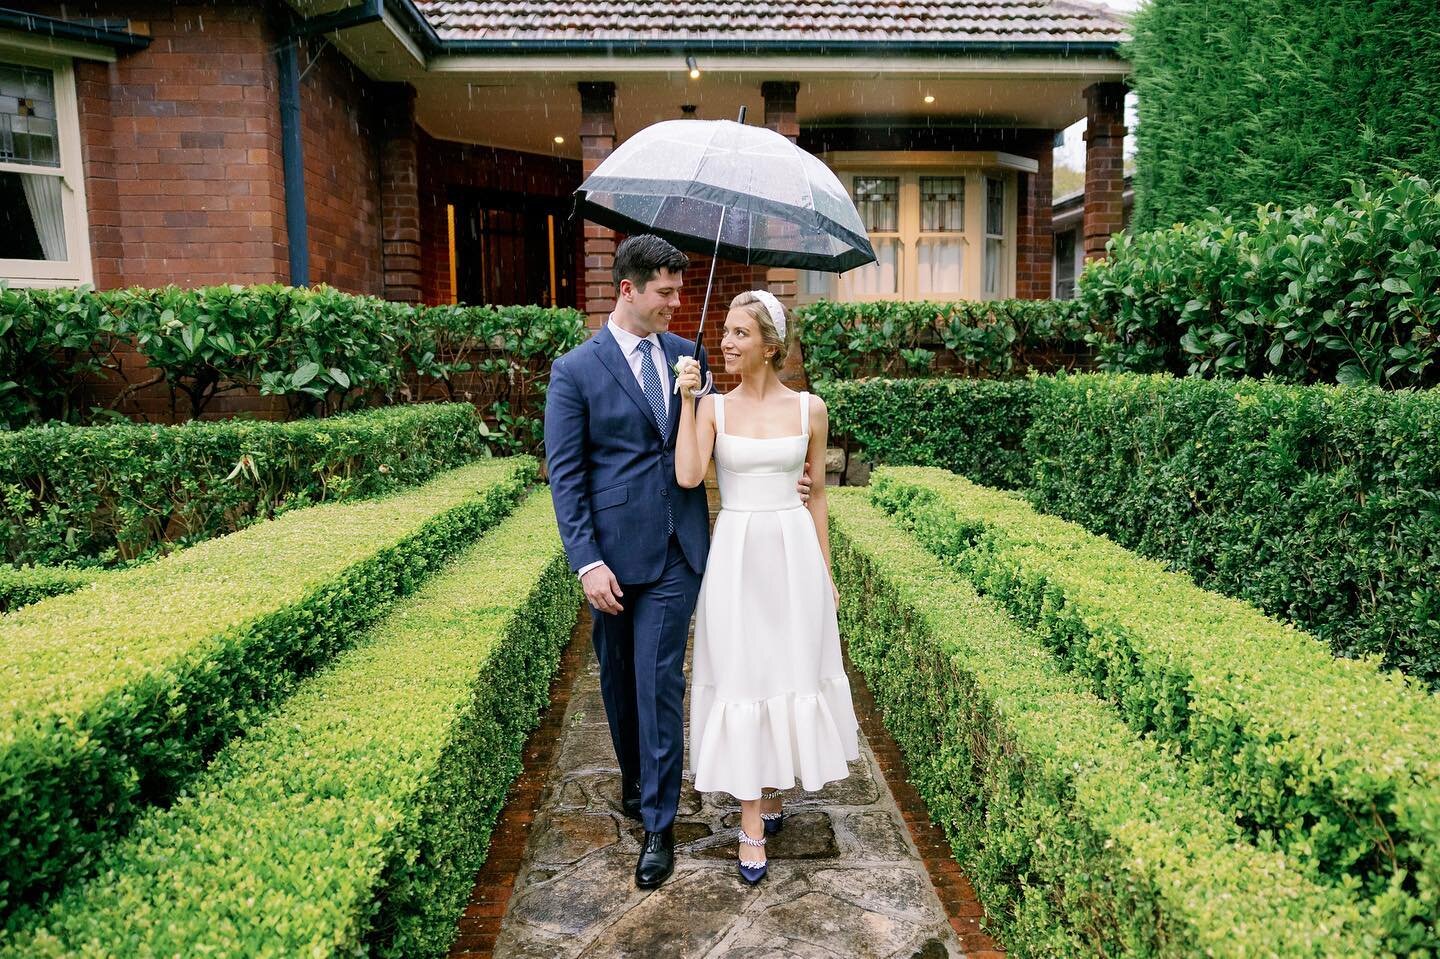 Rain, hail or shine the show must go on! A sweet moment yesterday with Kate and Tom. ☔️